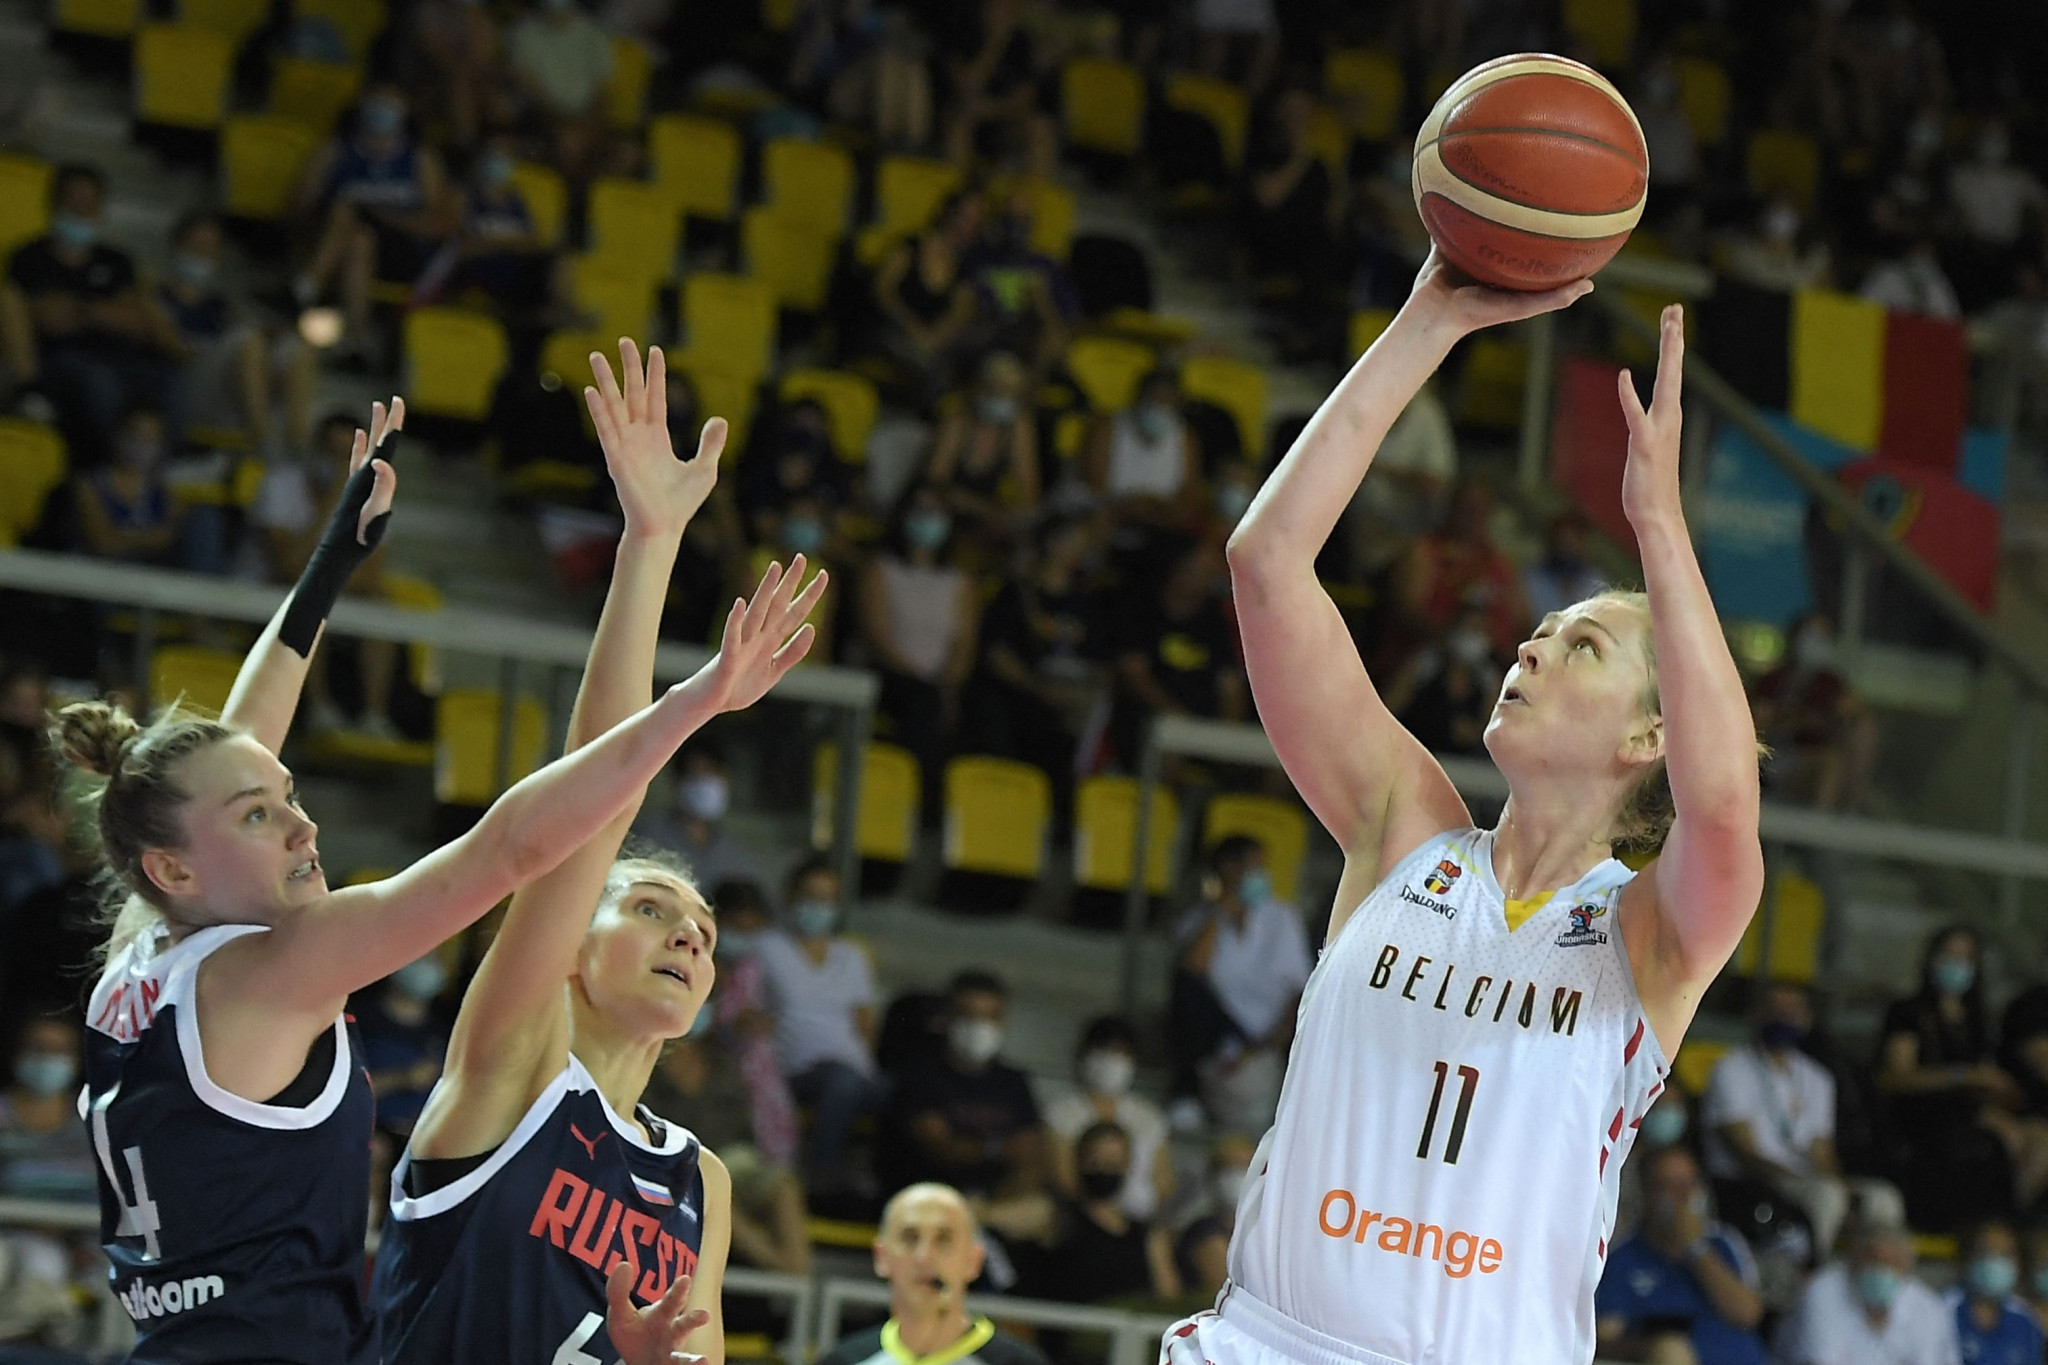 Belgium, playing in white, edged out Russia by two points in a thrilling FIBA Women's EuroBasket game today ©Getty Images